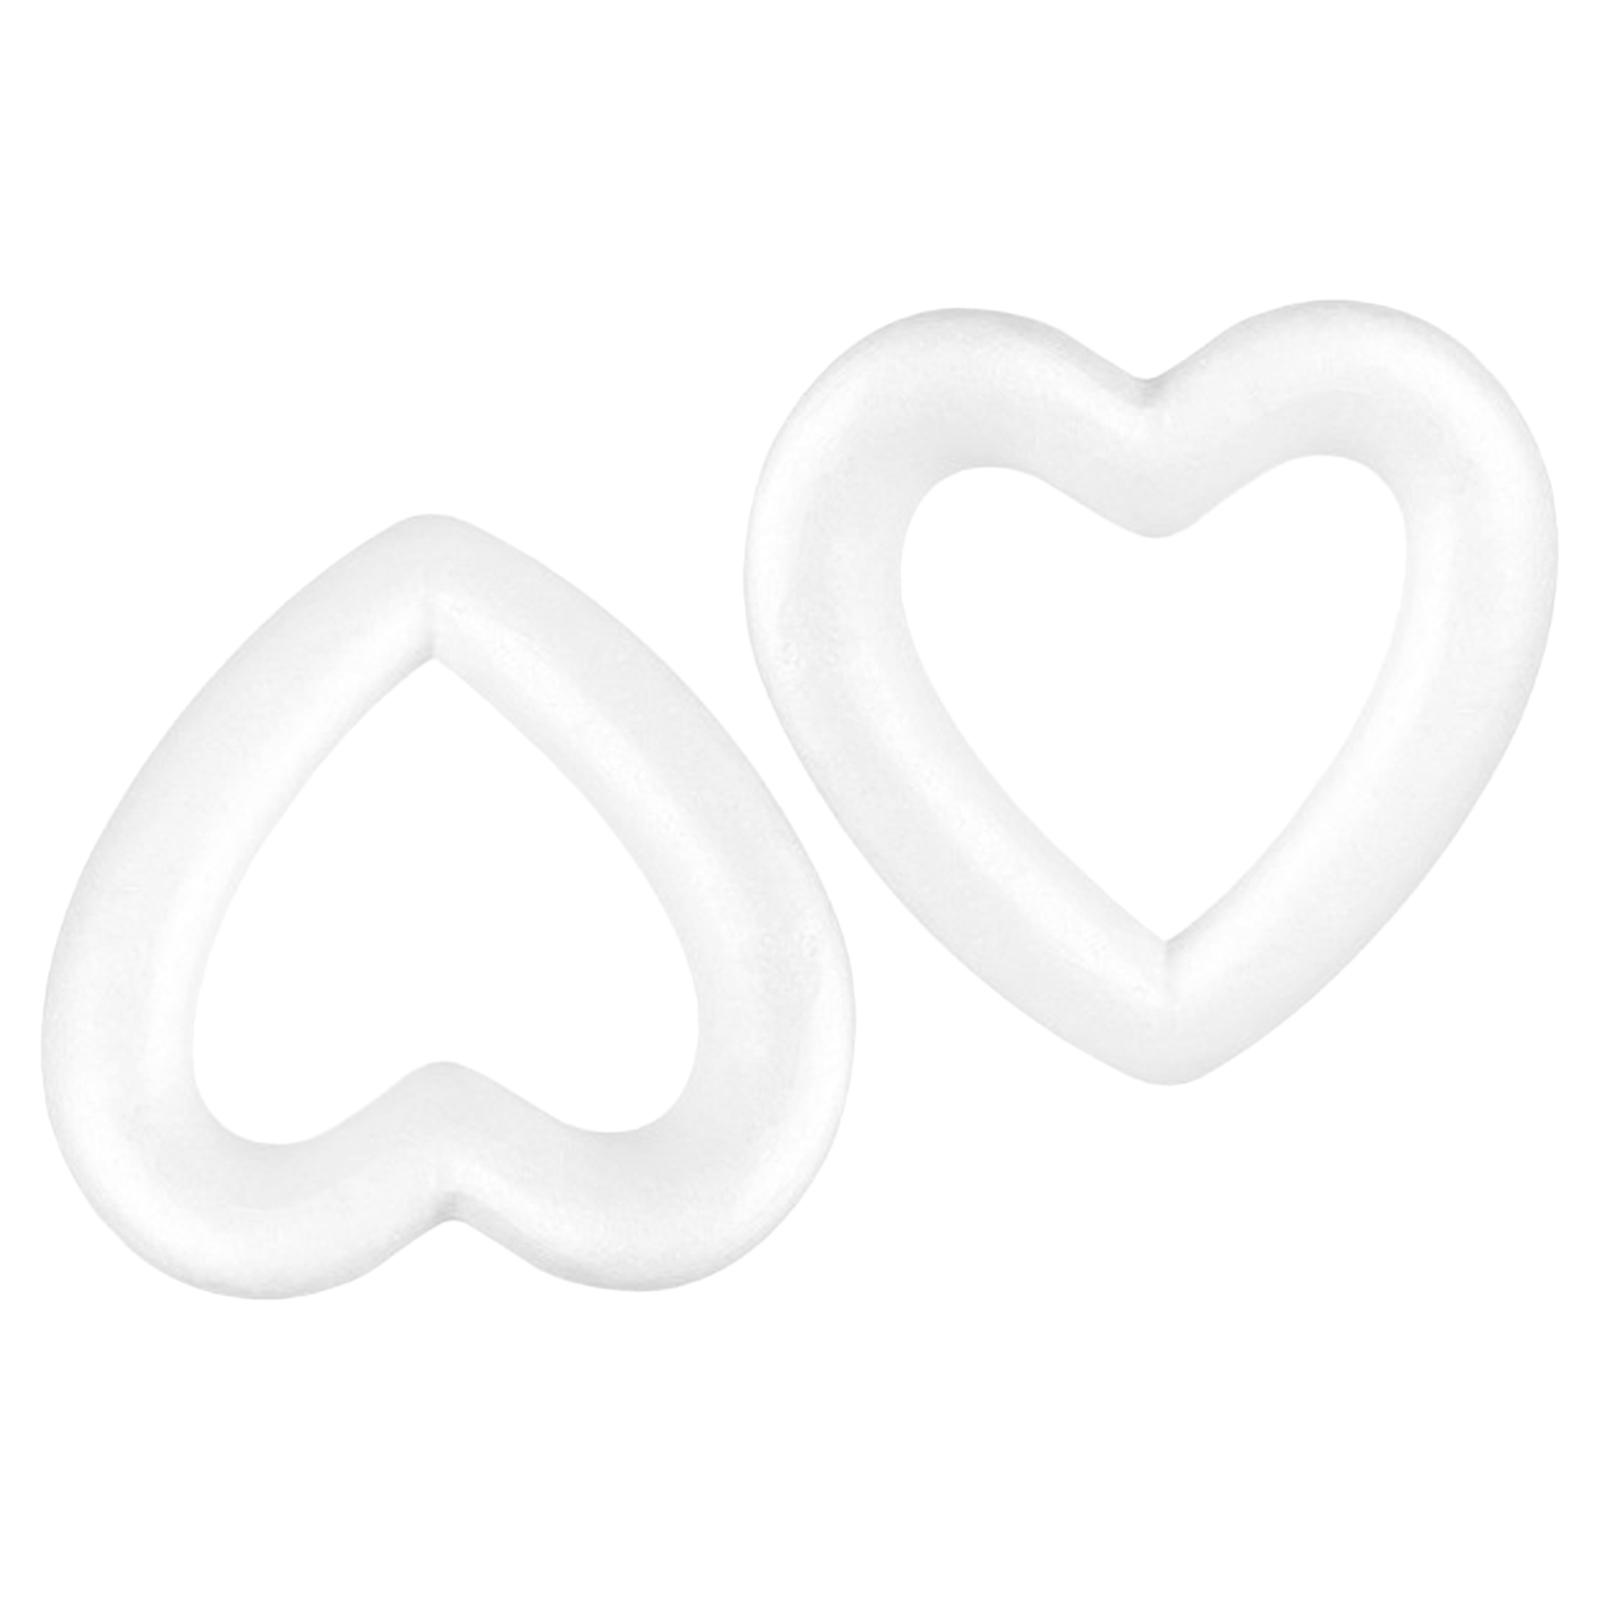 Foam Hearts - Hollow Shapes Wreath Crafts Ball Love Shaped, Customize w/  Flowers, Paint, Rope, Twine, Ribbon,, Embellishments - 2PCS/20CM